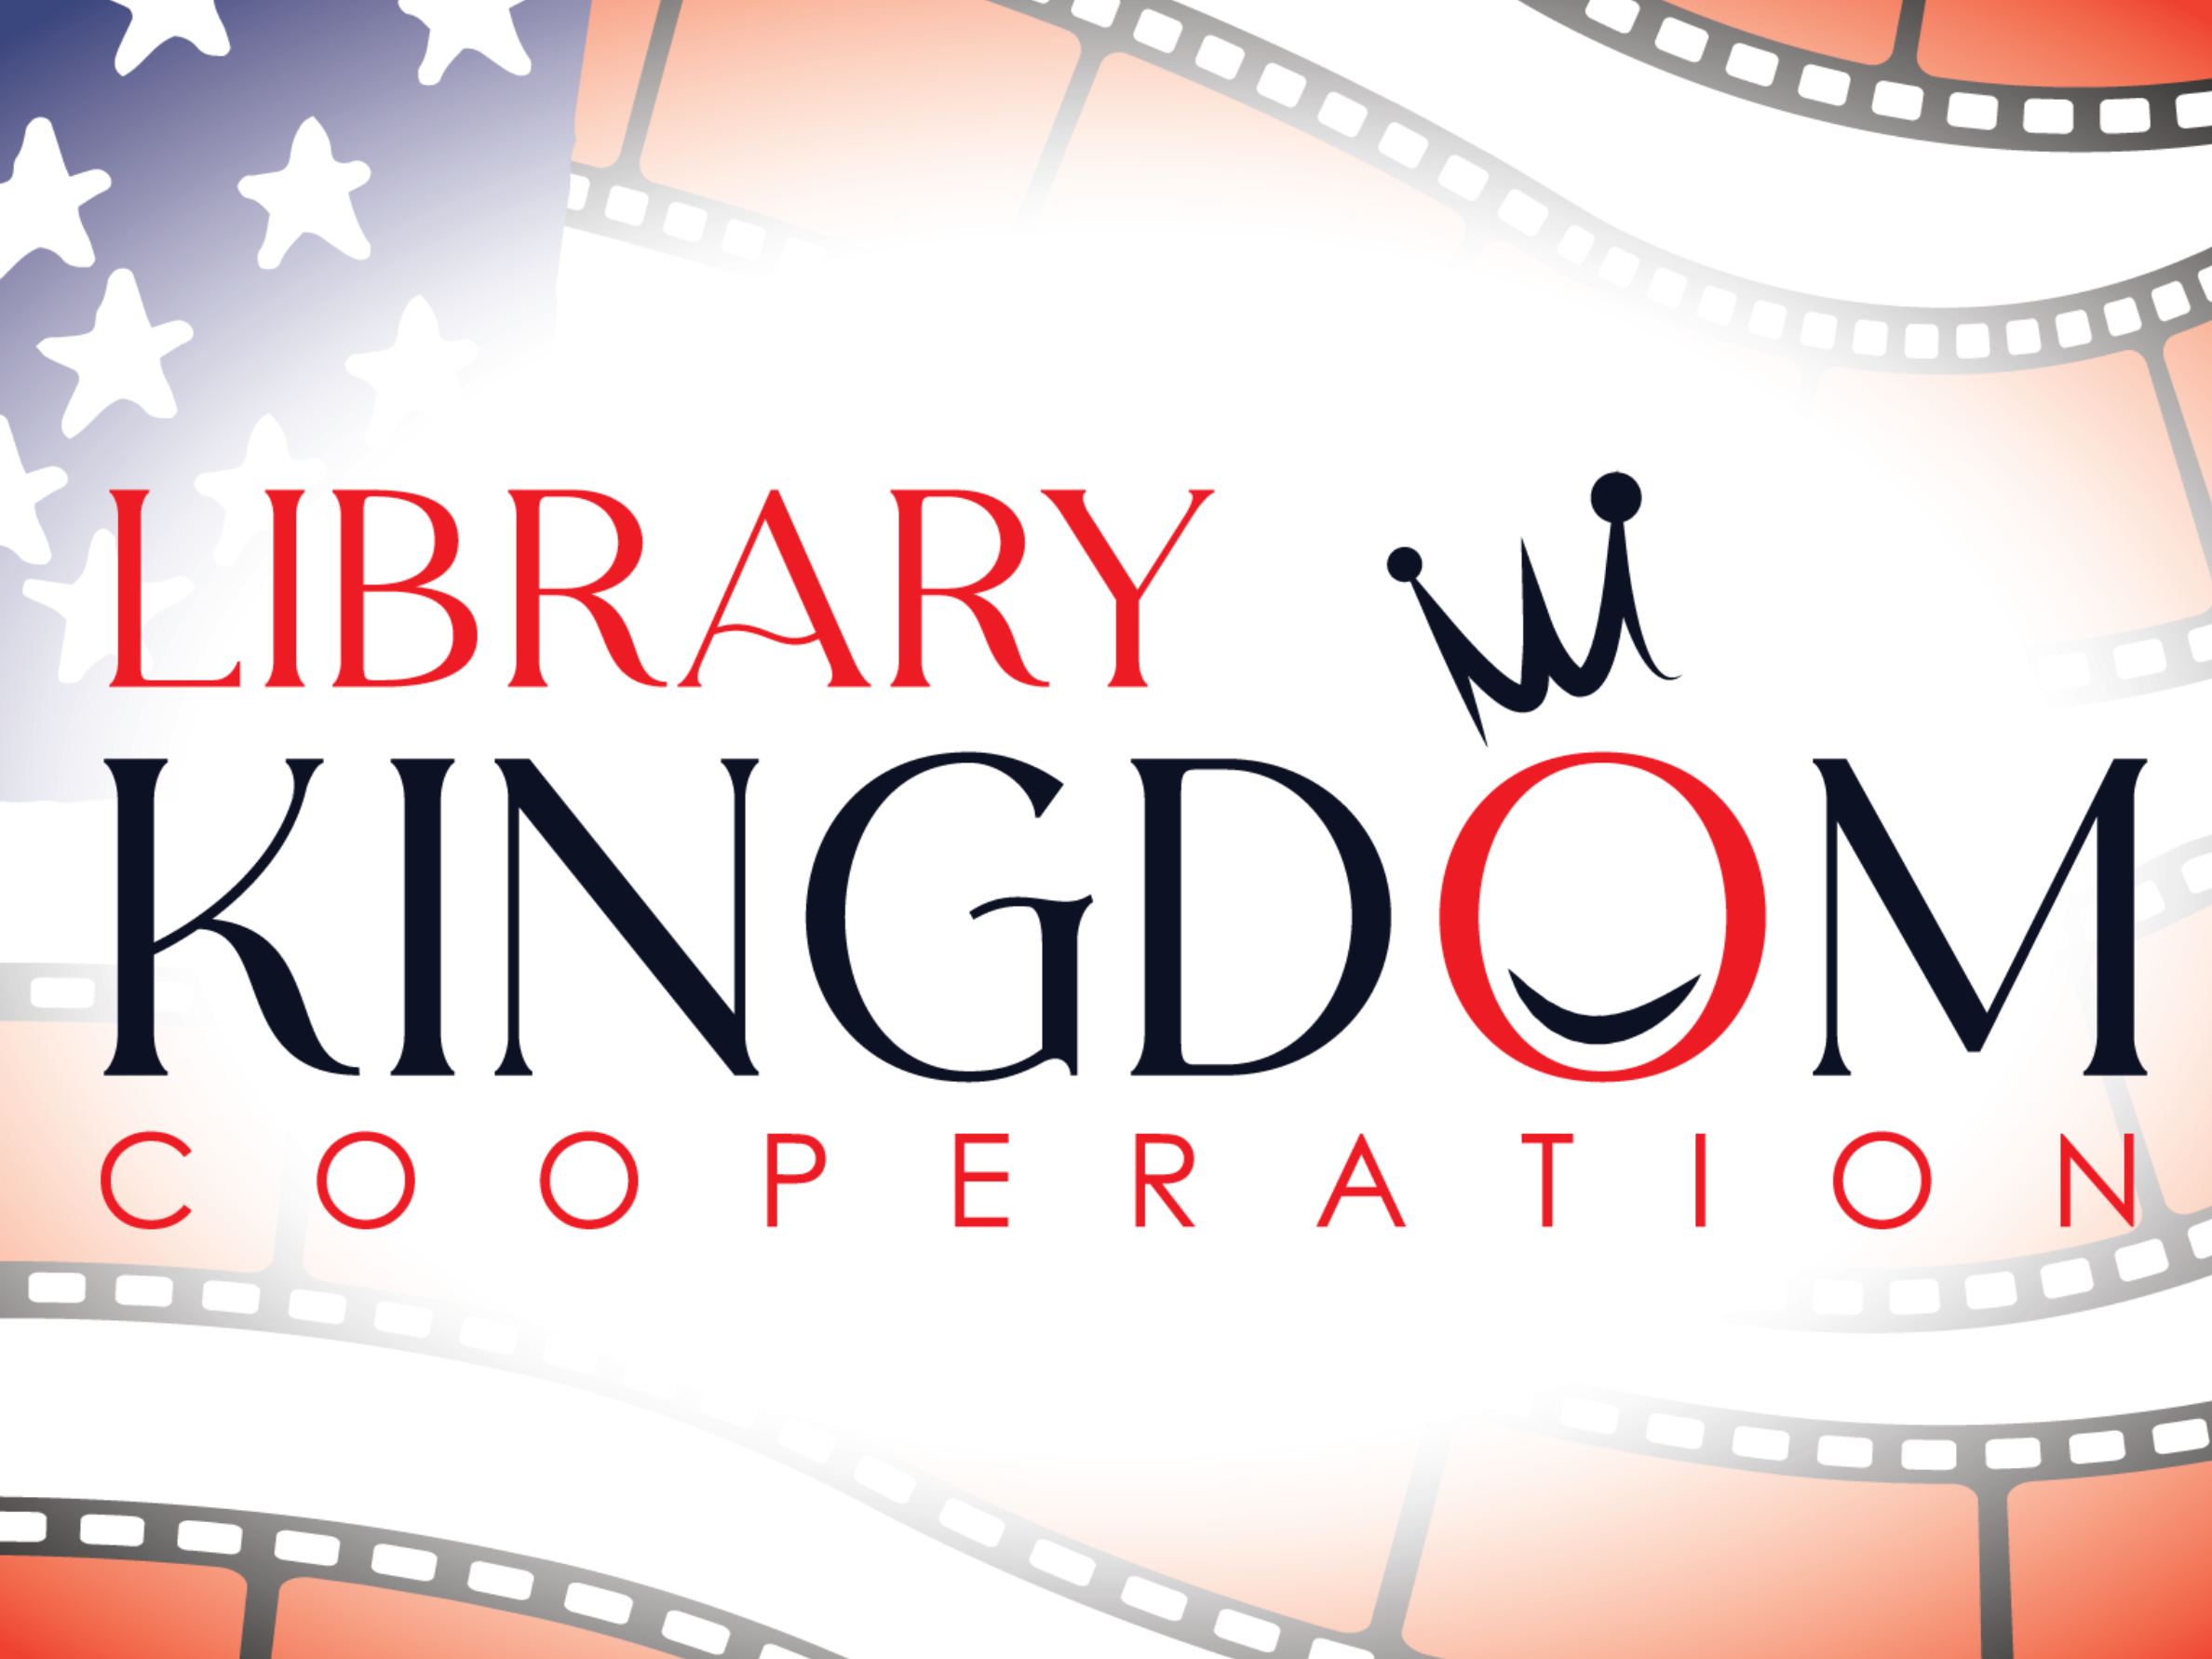 Library Kingdom Cooperation